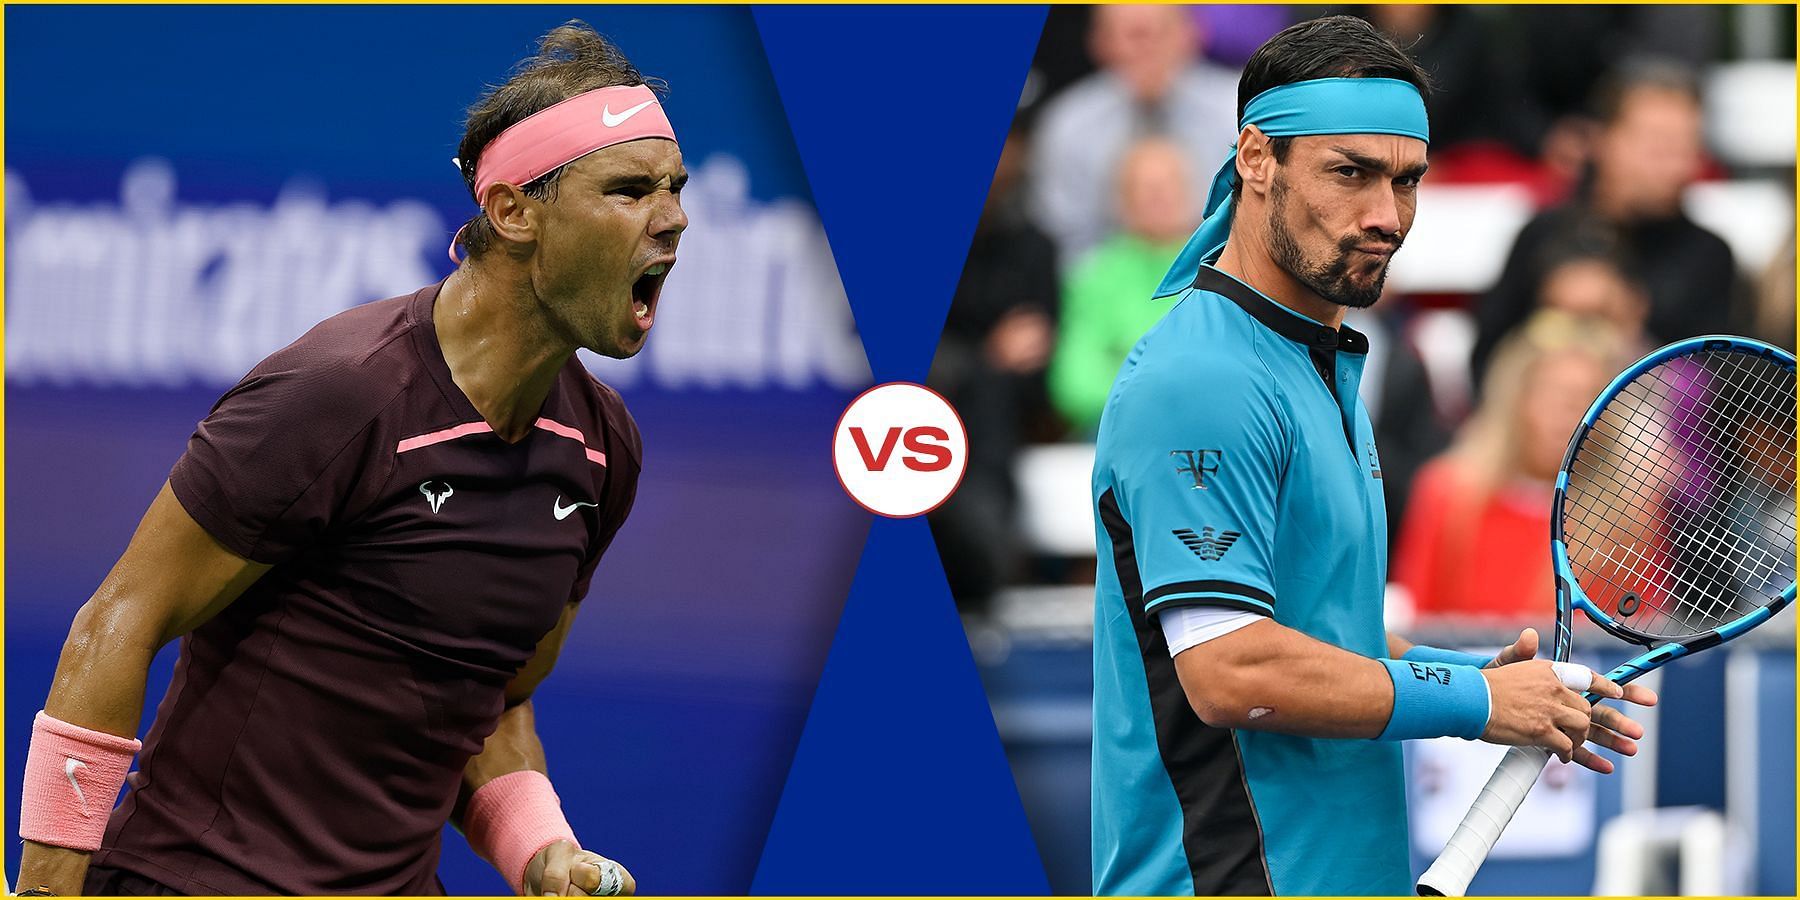 Rafael Nadal will face Fabio Fognini in the first round of the US Open